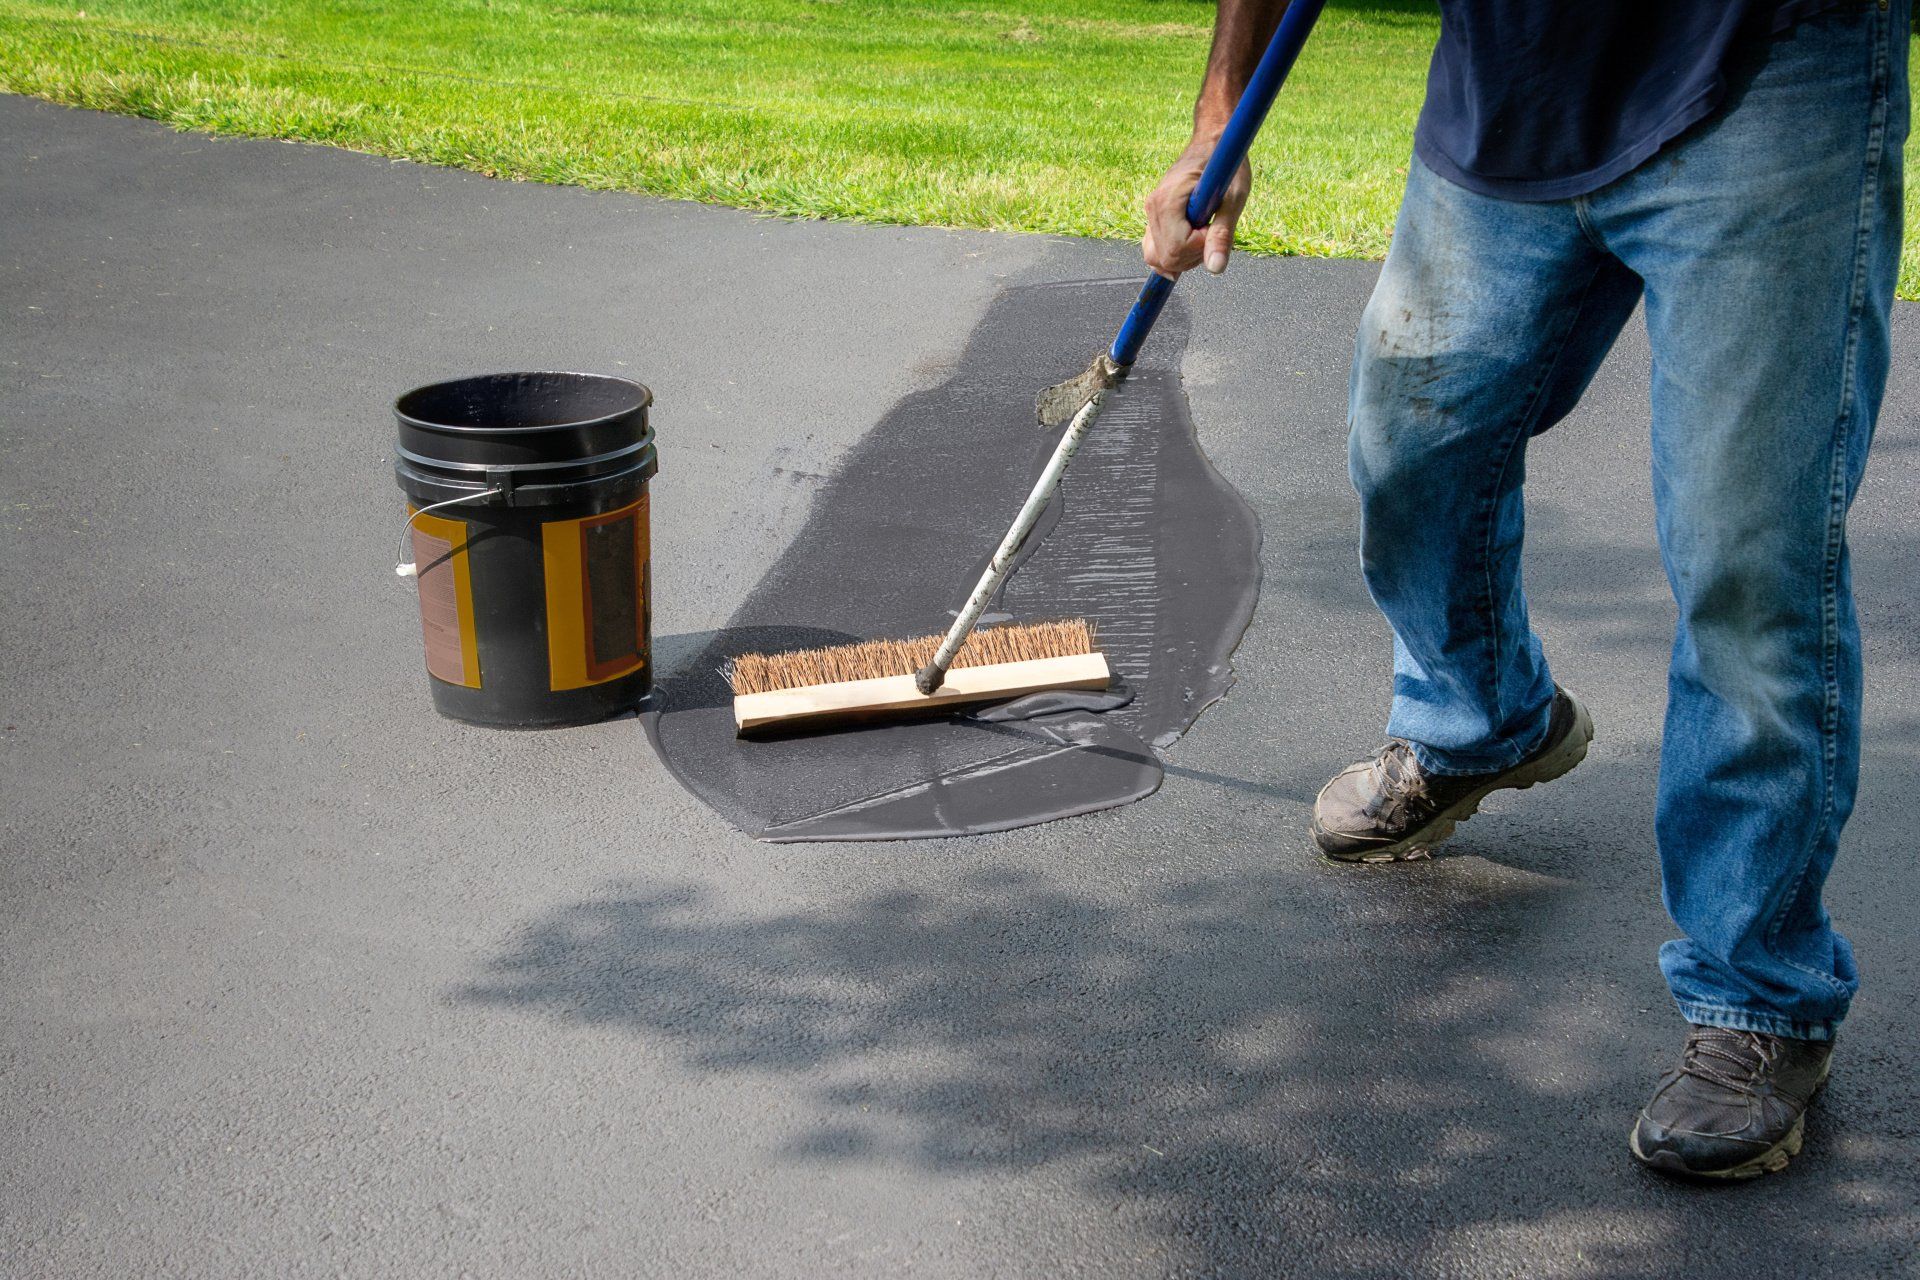 A man spreads blacktop asphalt sealant evenly on a residential driveway using a large brush.